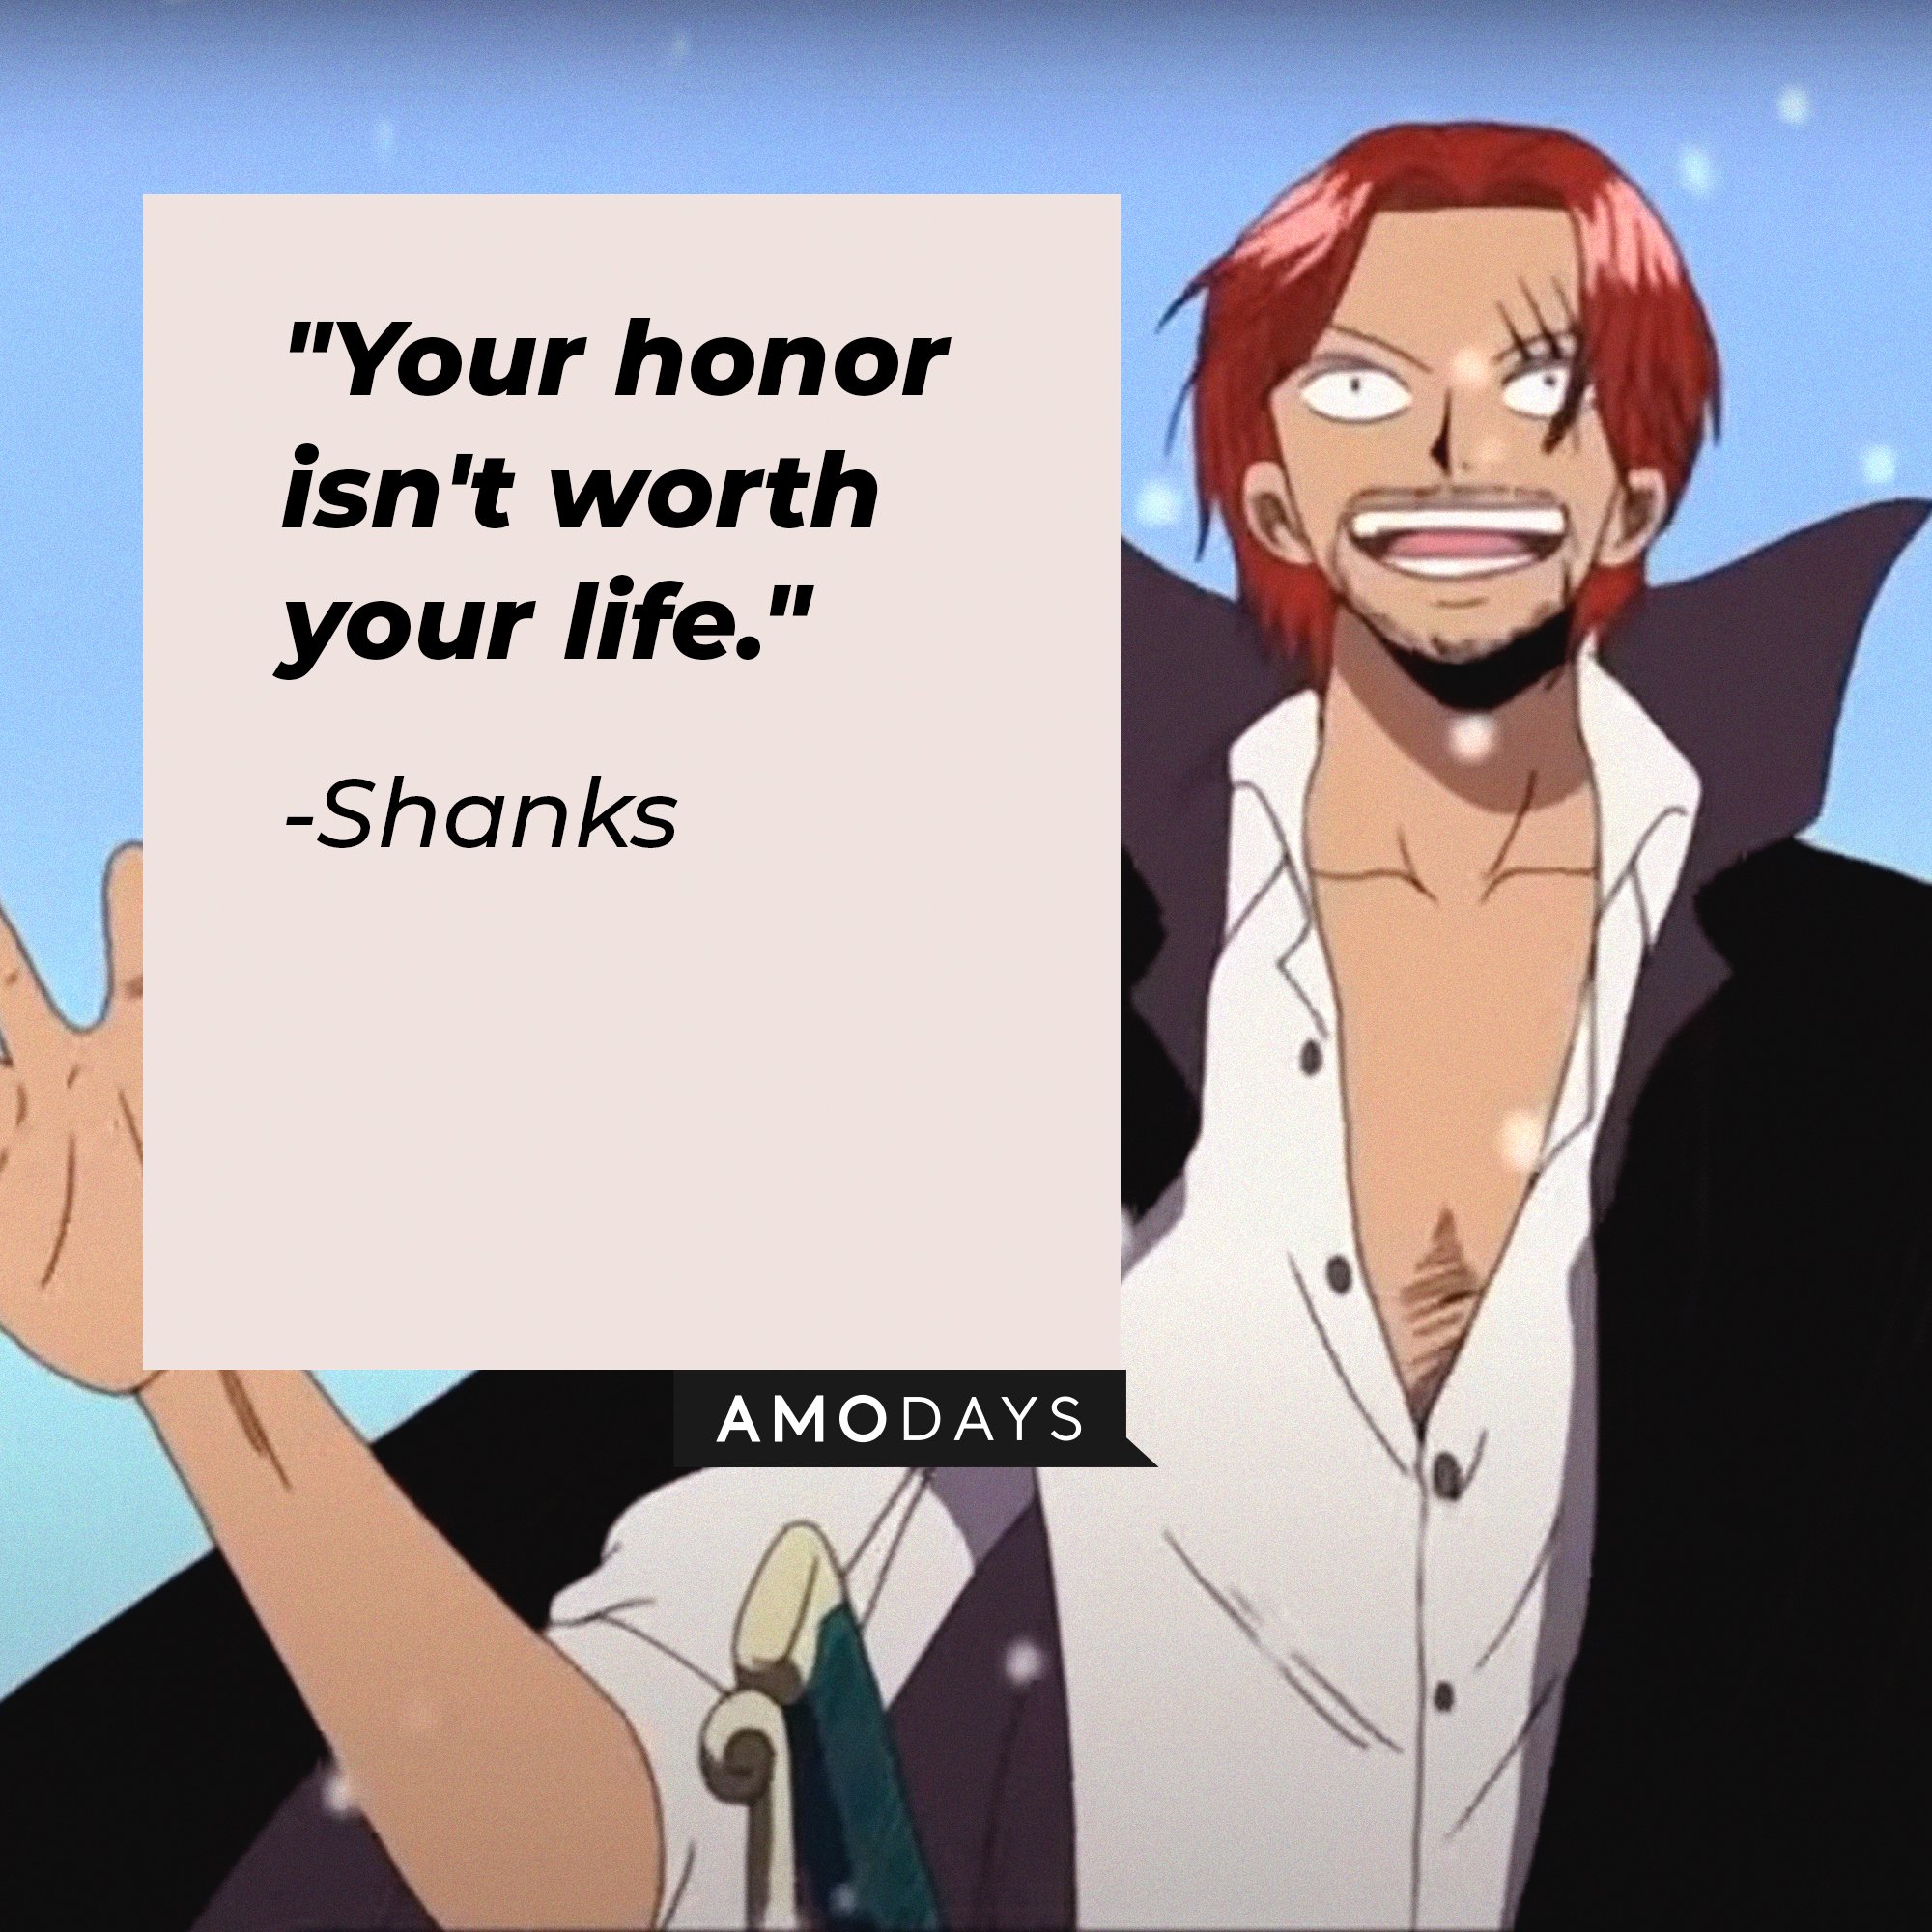 Shanks' quote: "Your honor isn't worth your life." | Image: AmoDays